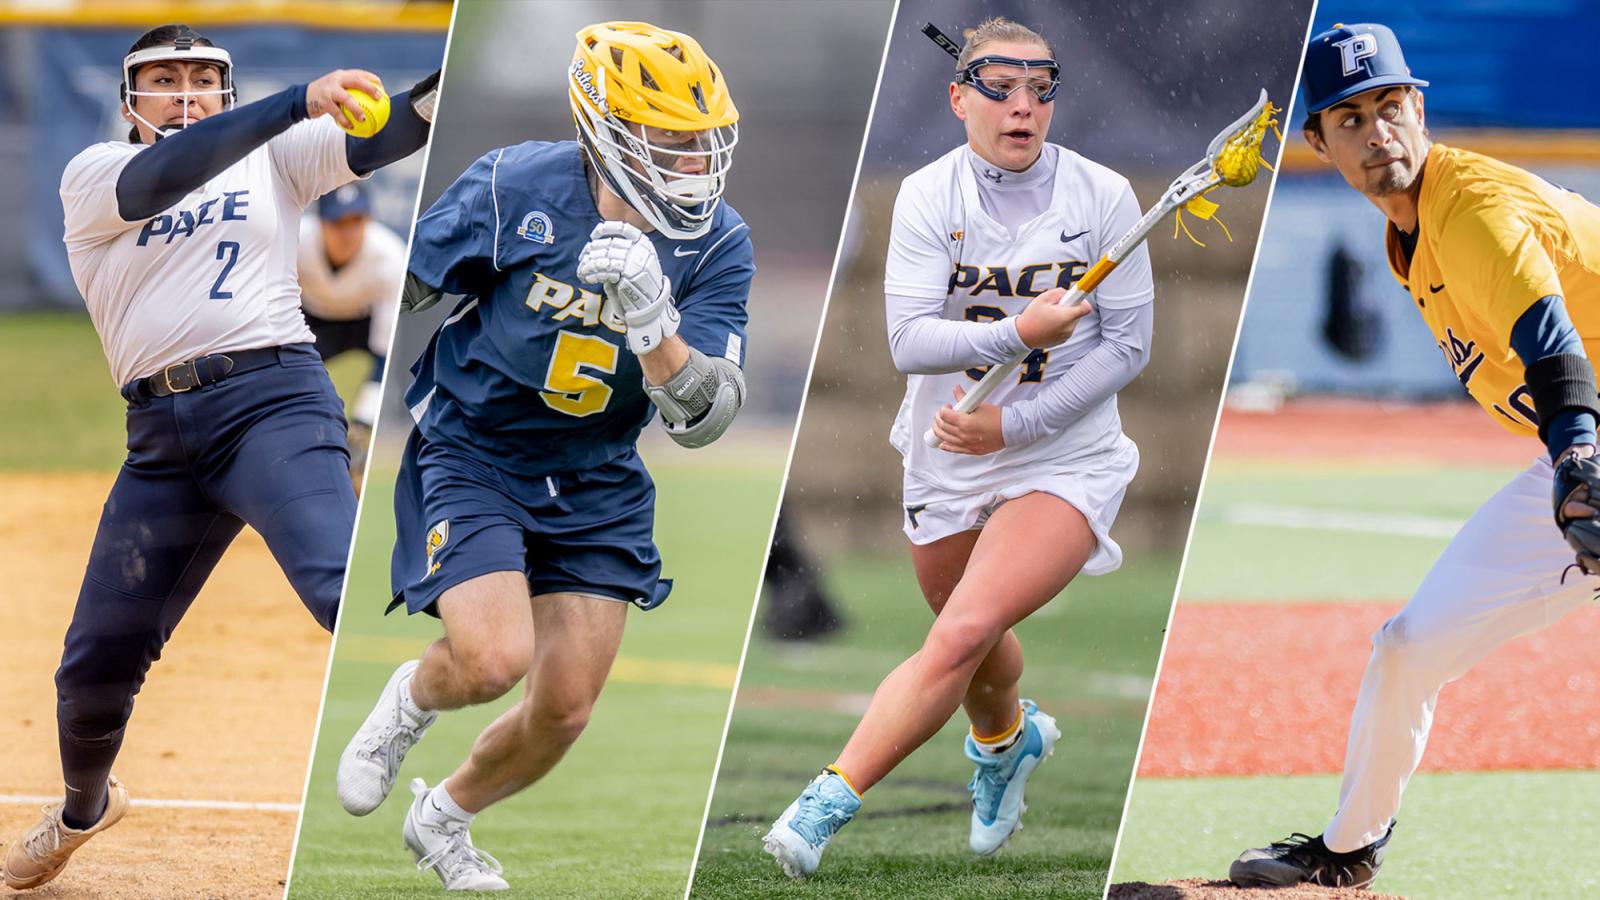 Side by side images of Pace softball, men's and women's lacrosse, and baseball